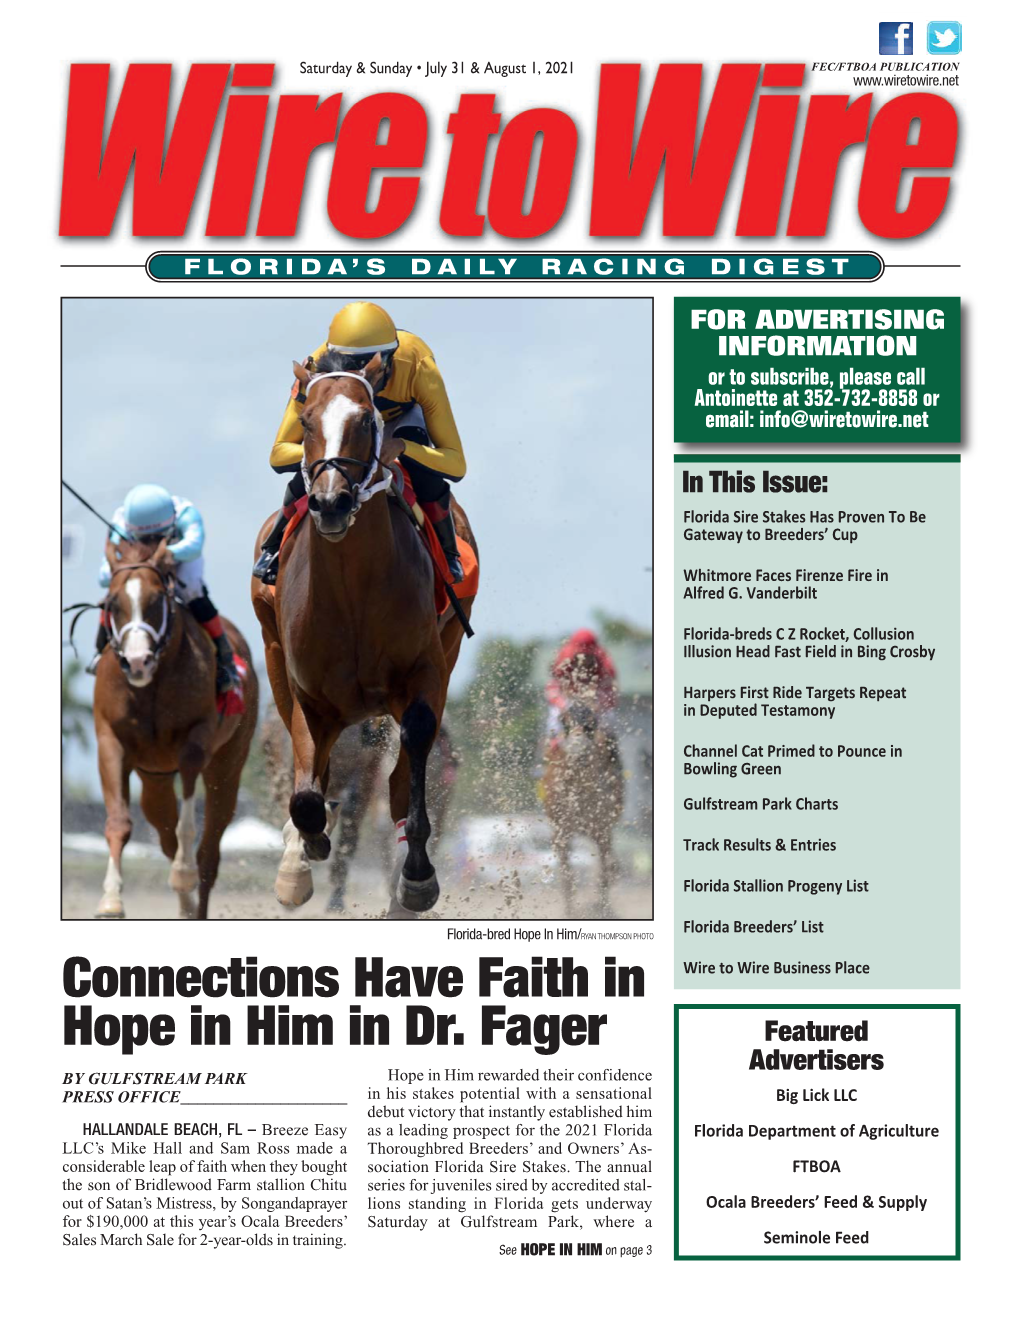 Connections Have Faith in Hope in Him in Dr. Fager